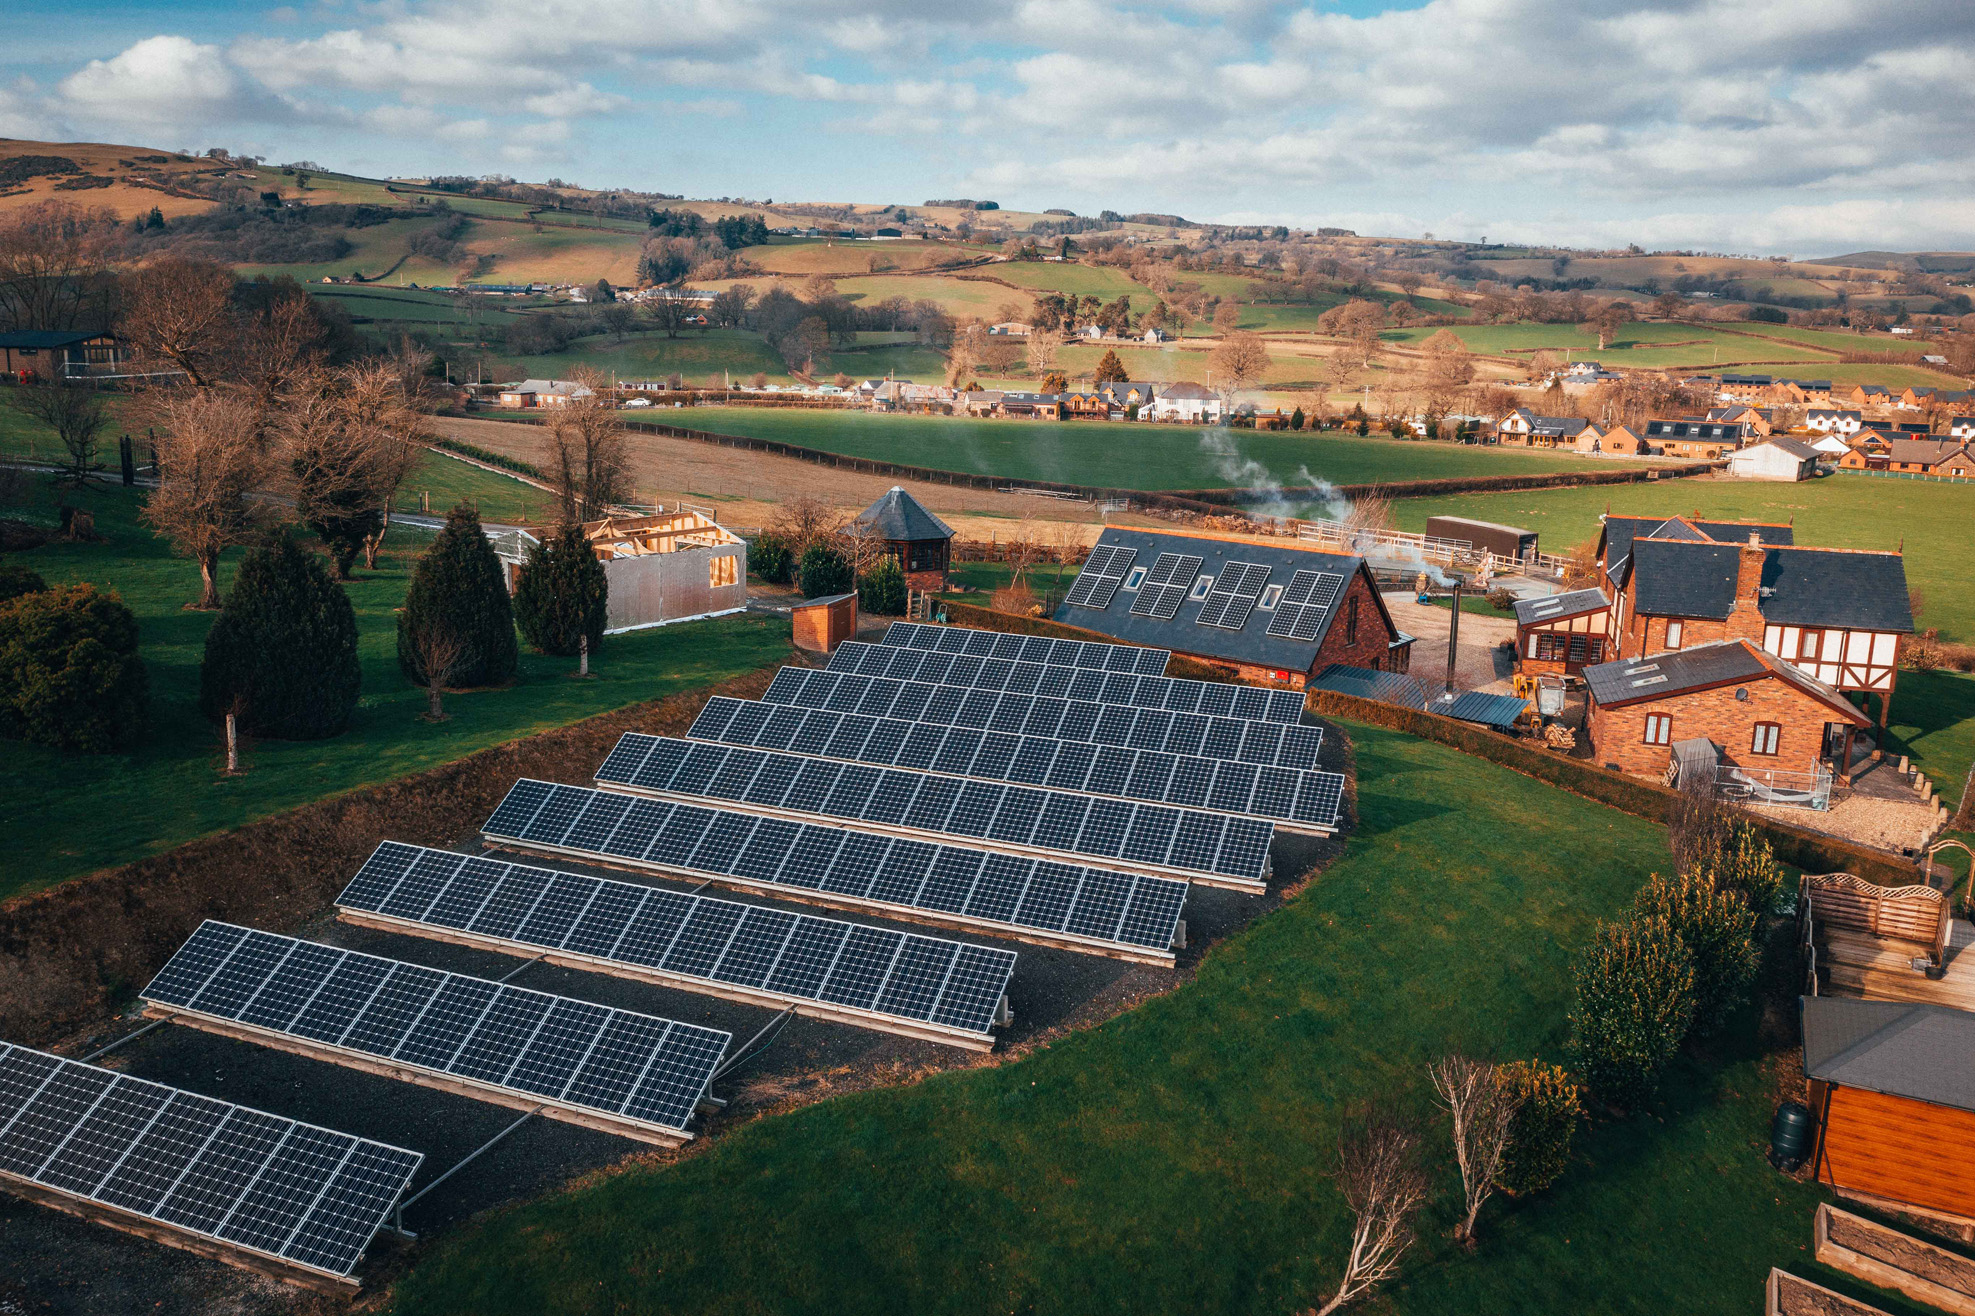 Our solar panel field next to Grandstand that powers our luxury lodges wales